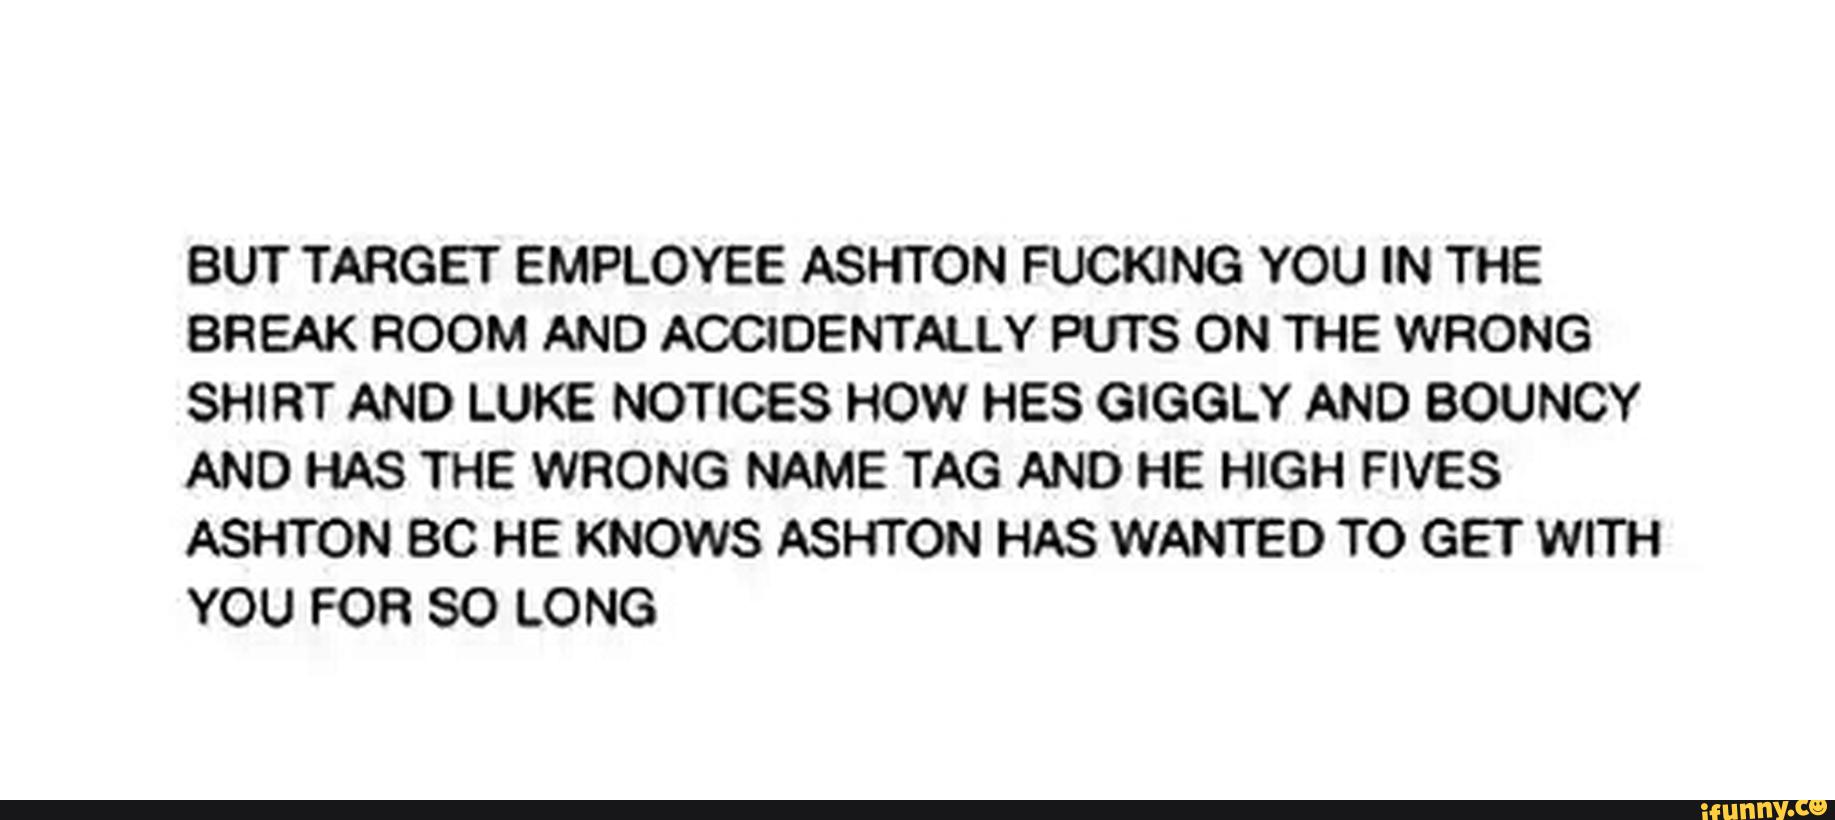 But Target Employee Ashton Fucking You In The Break Room And